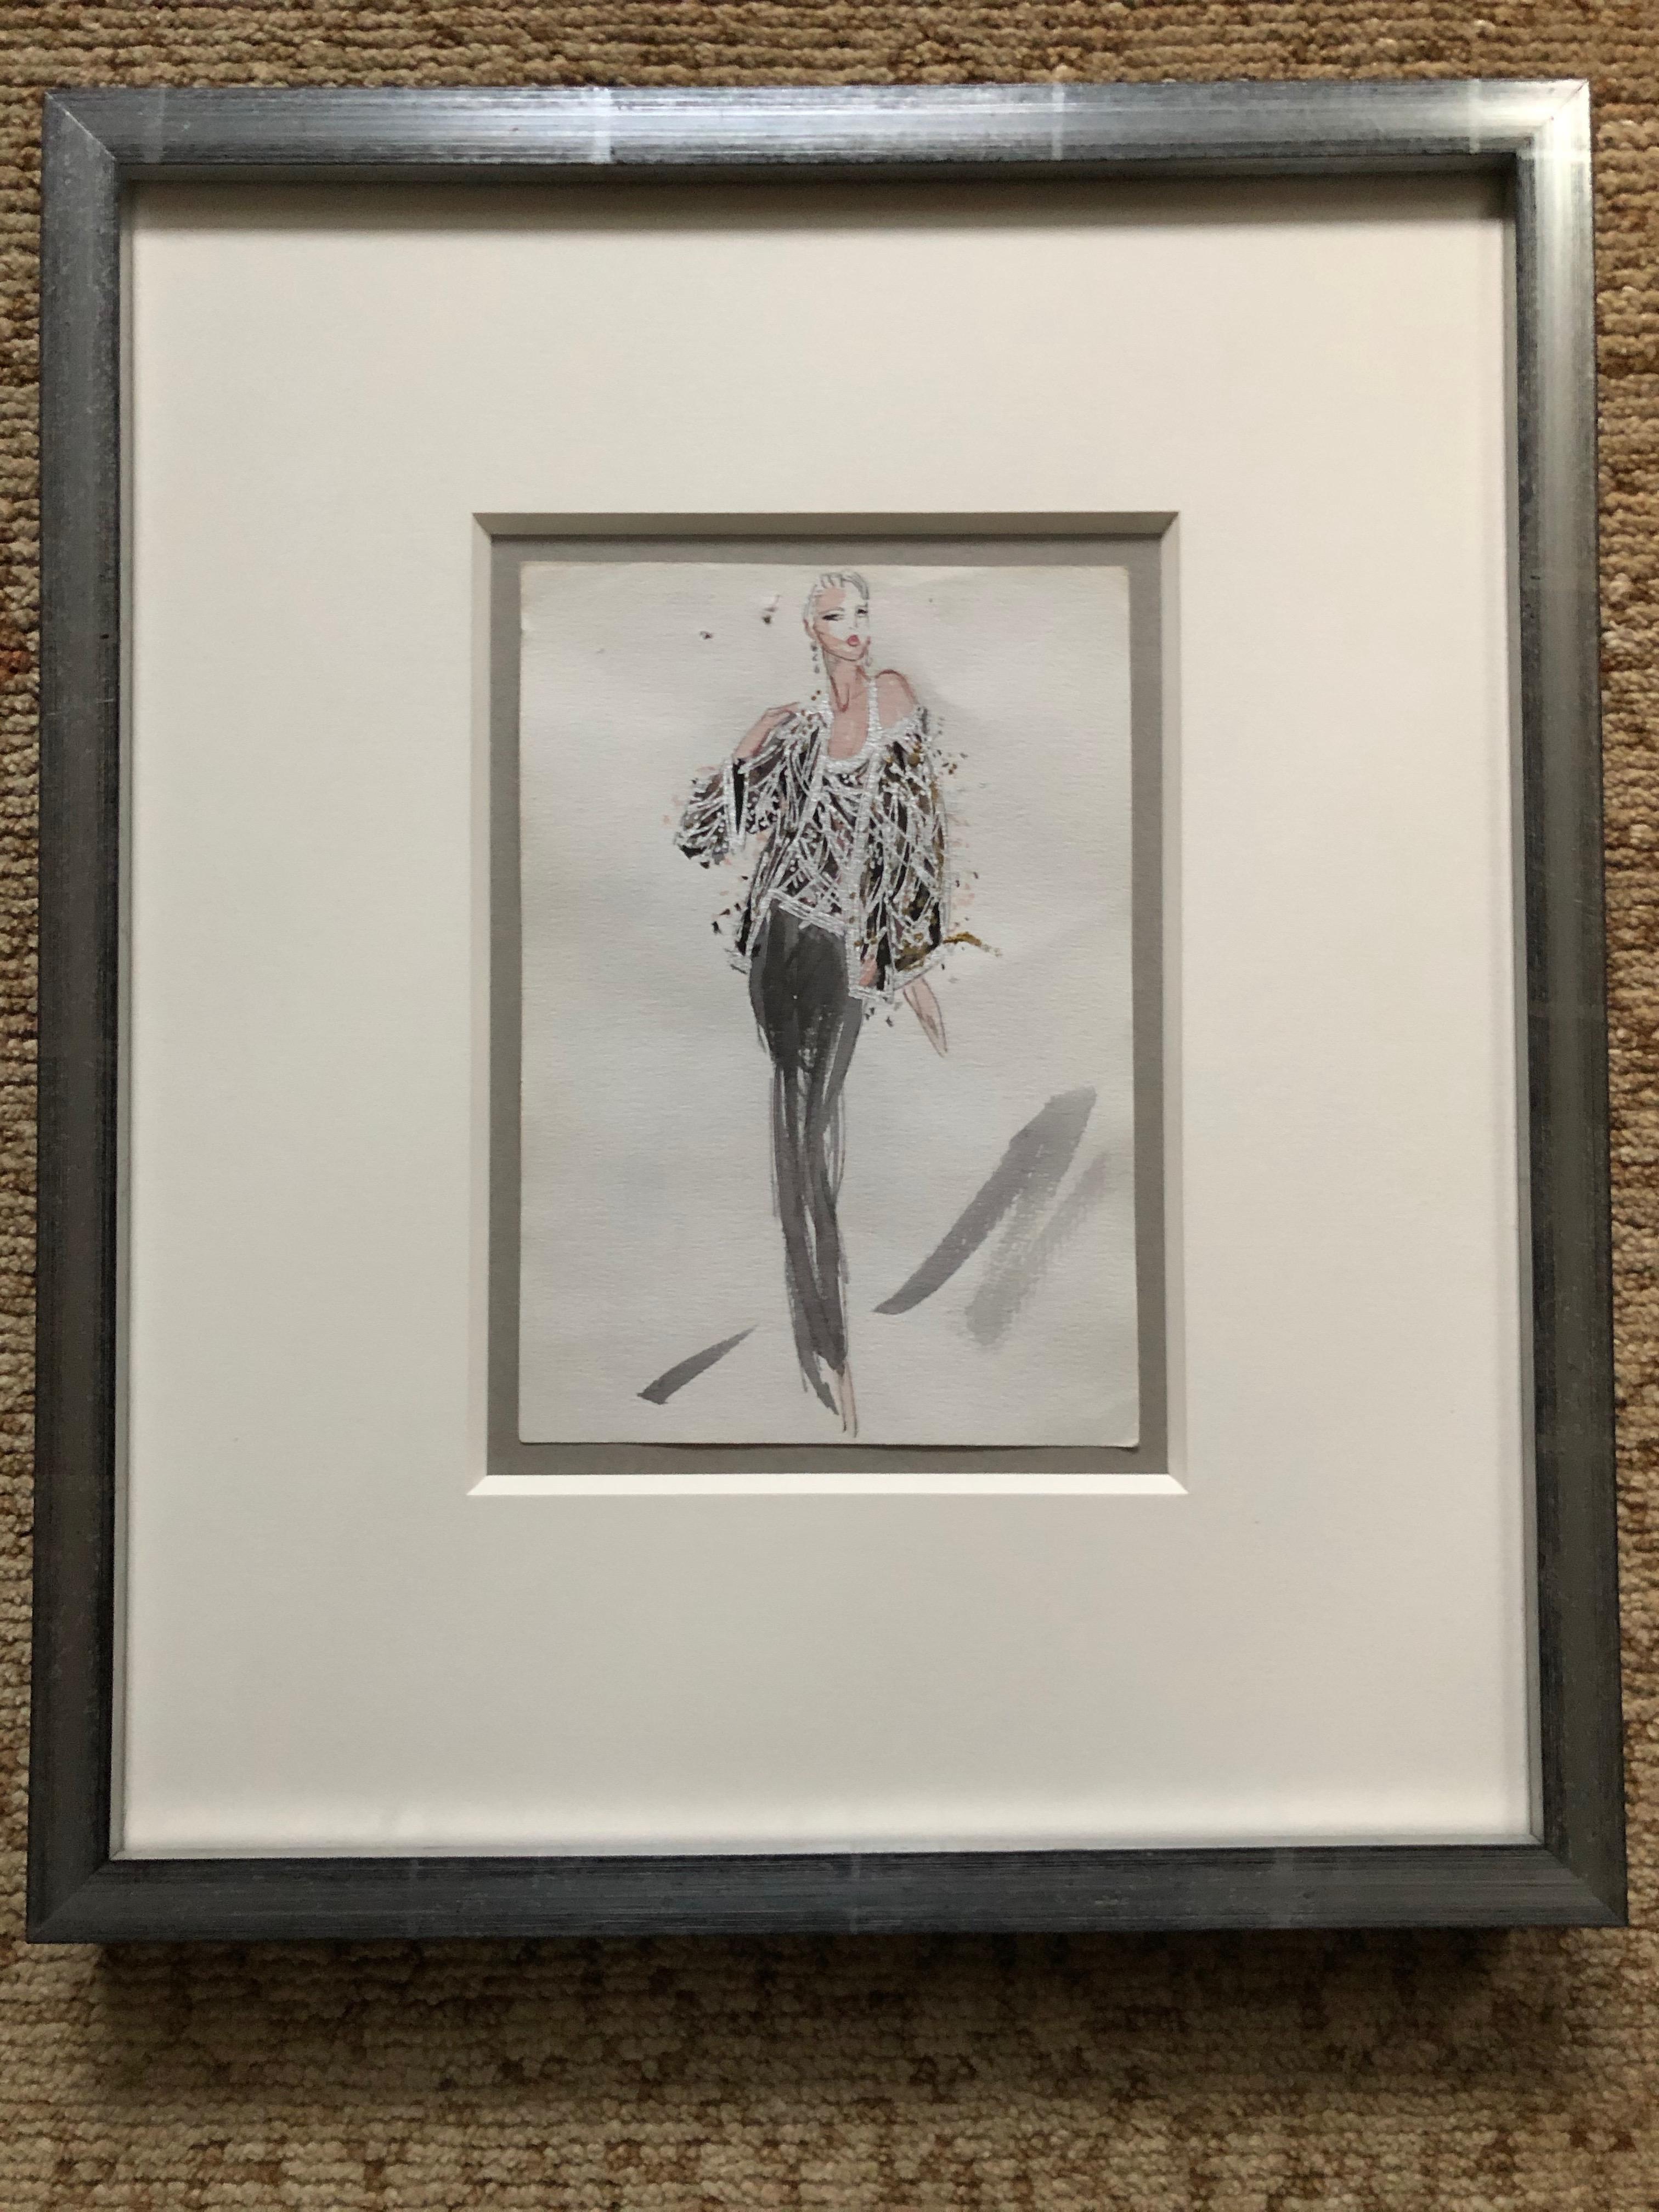 Halston 1983 Original Fashion Illustration Beaded Feather Ensemble by Sui Yee.
Halston was unique in that he had each design illustrated by an in house artist.
Joe Eula captured the spirit beautifully until 1980, and another talented artist named